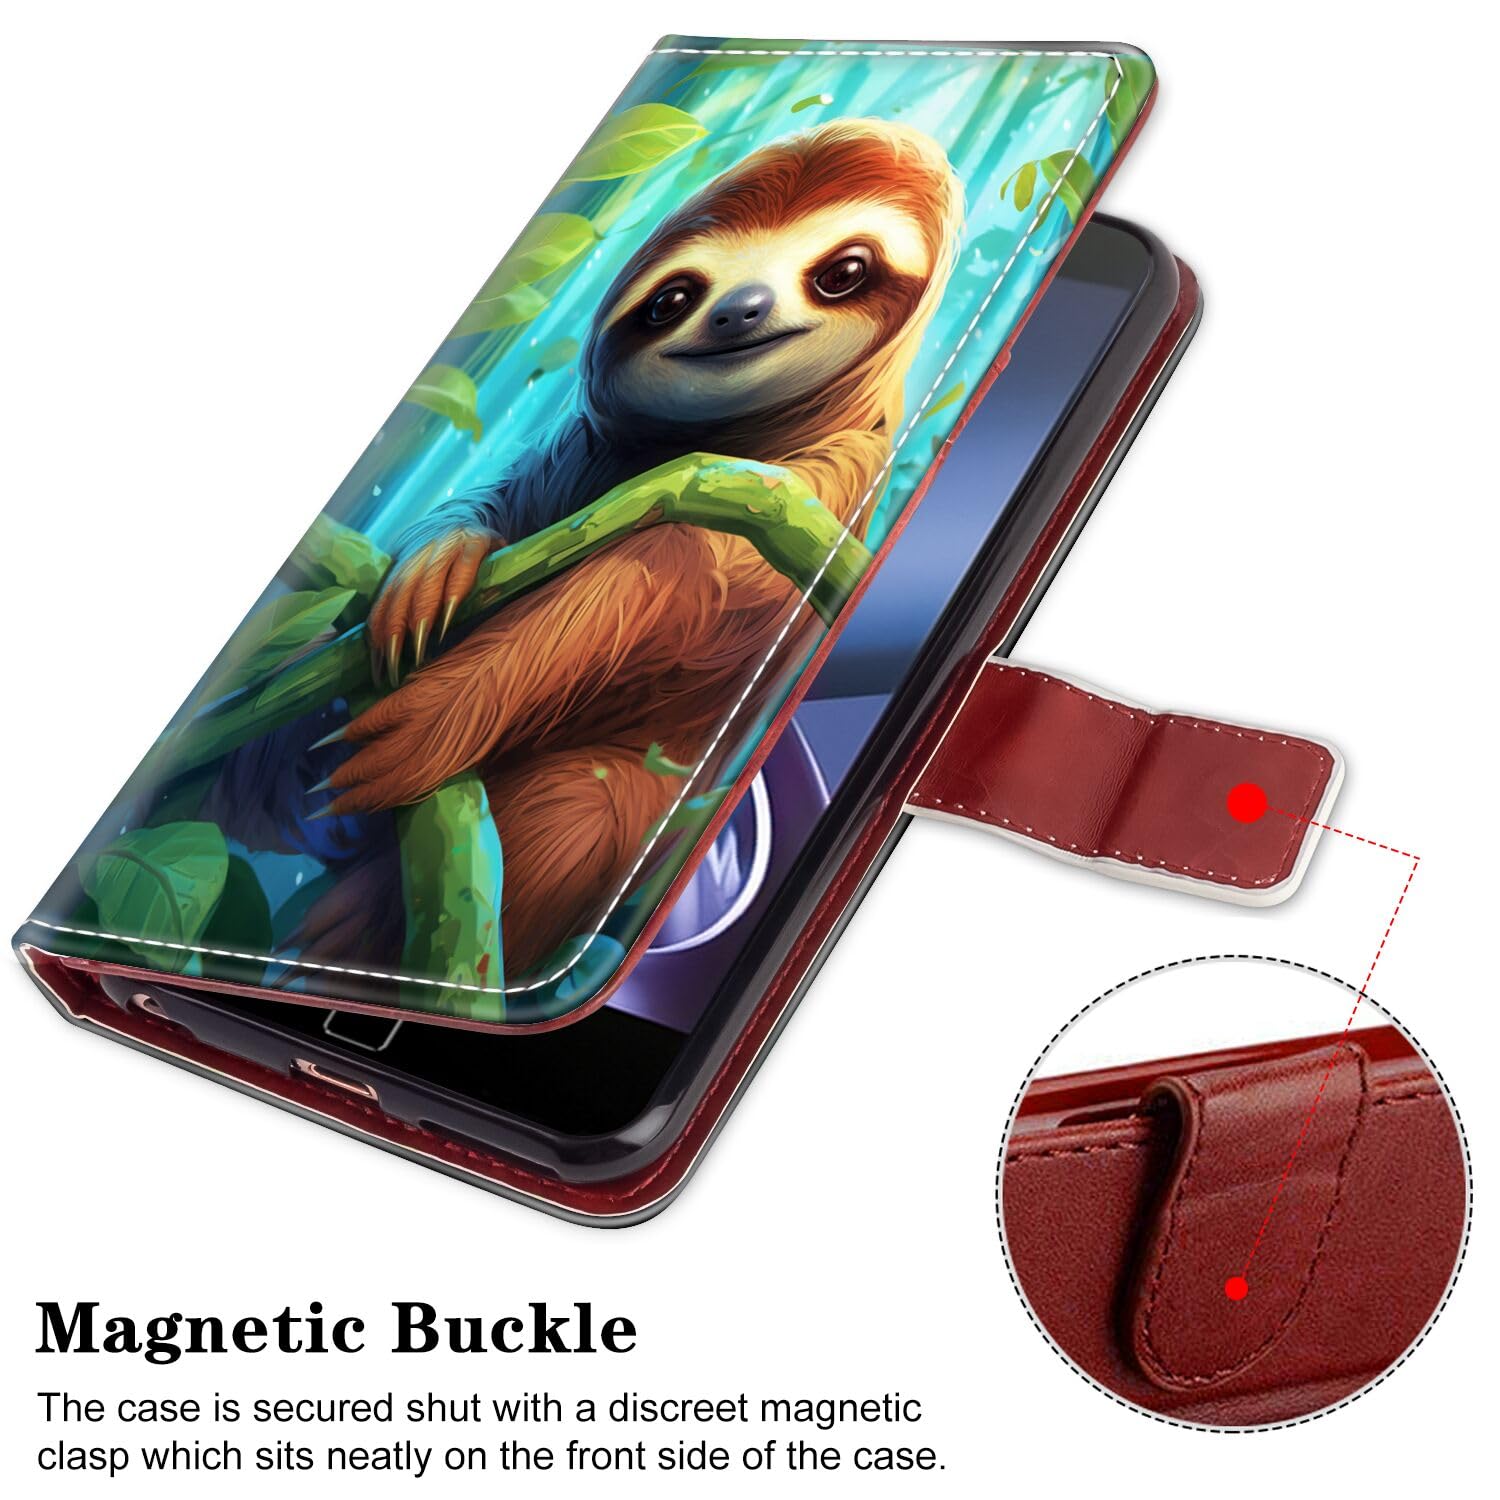 DeweiDirect Wallet Case suitable for Moto G Power (2021) with Sloth-aa89 pattern, Top PU Leather, Kickstand with Wrist Strap Multifunction Smartphone Cellphone Case Folio Pocket Flip Lanyard